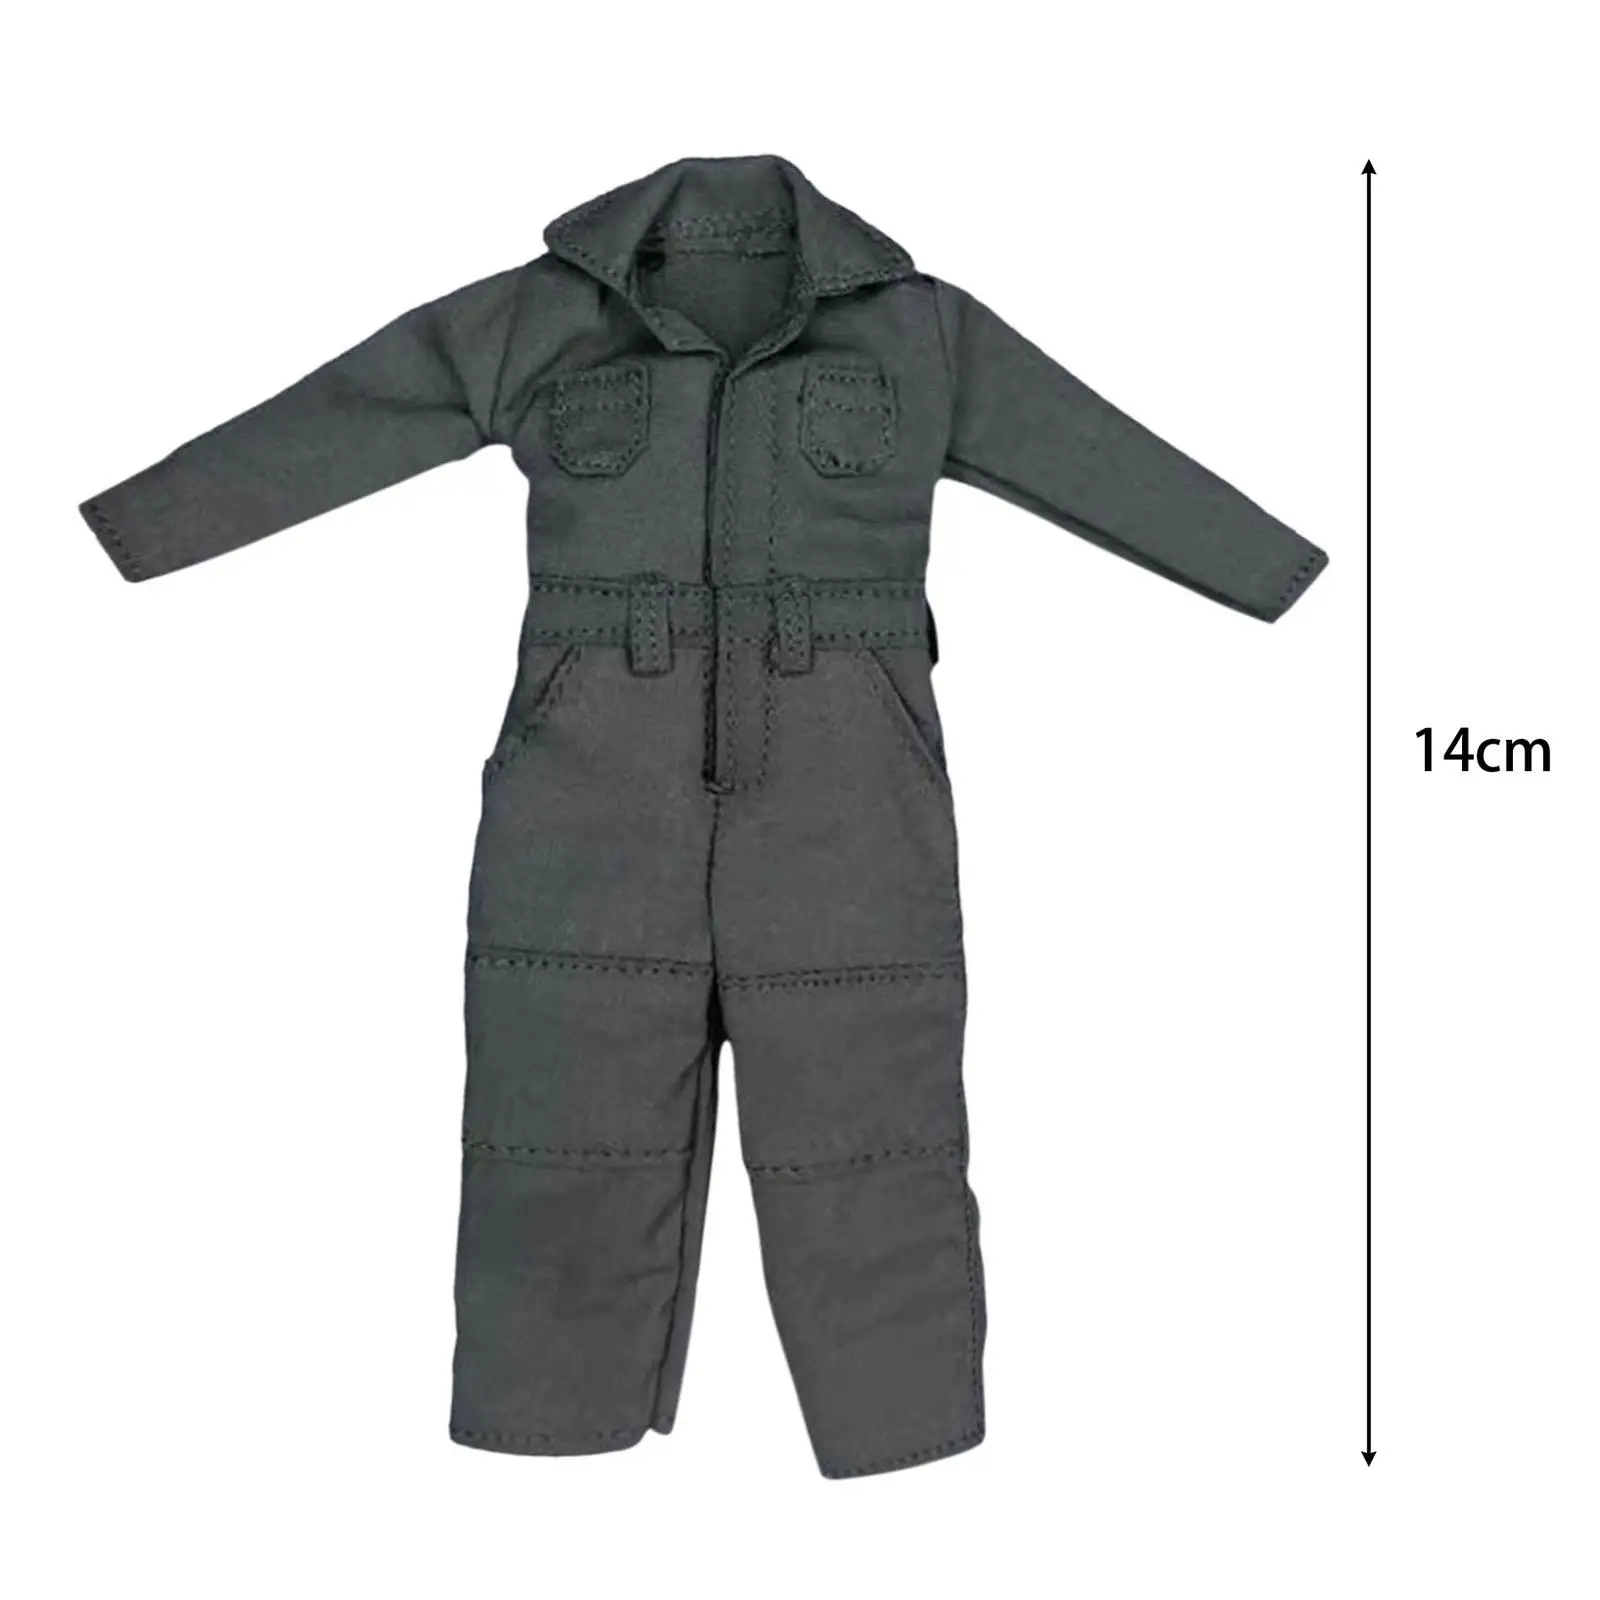 1/12 Scale Jumpsuit Action Figures Coveralls Miniature Soldier Costume Doll Uniform Model Doll Toy for Presents Study Room